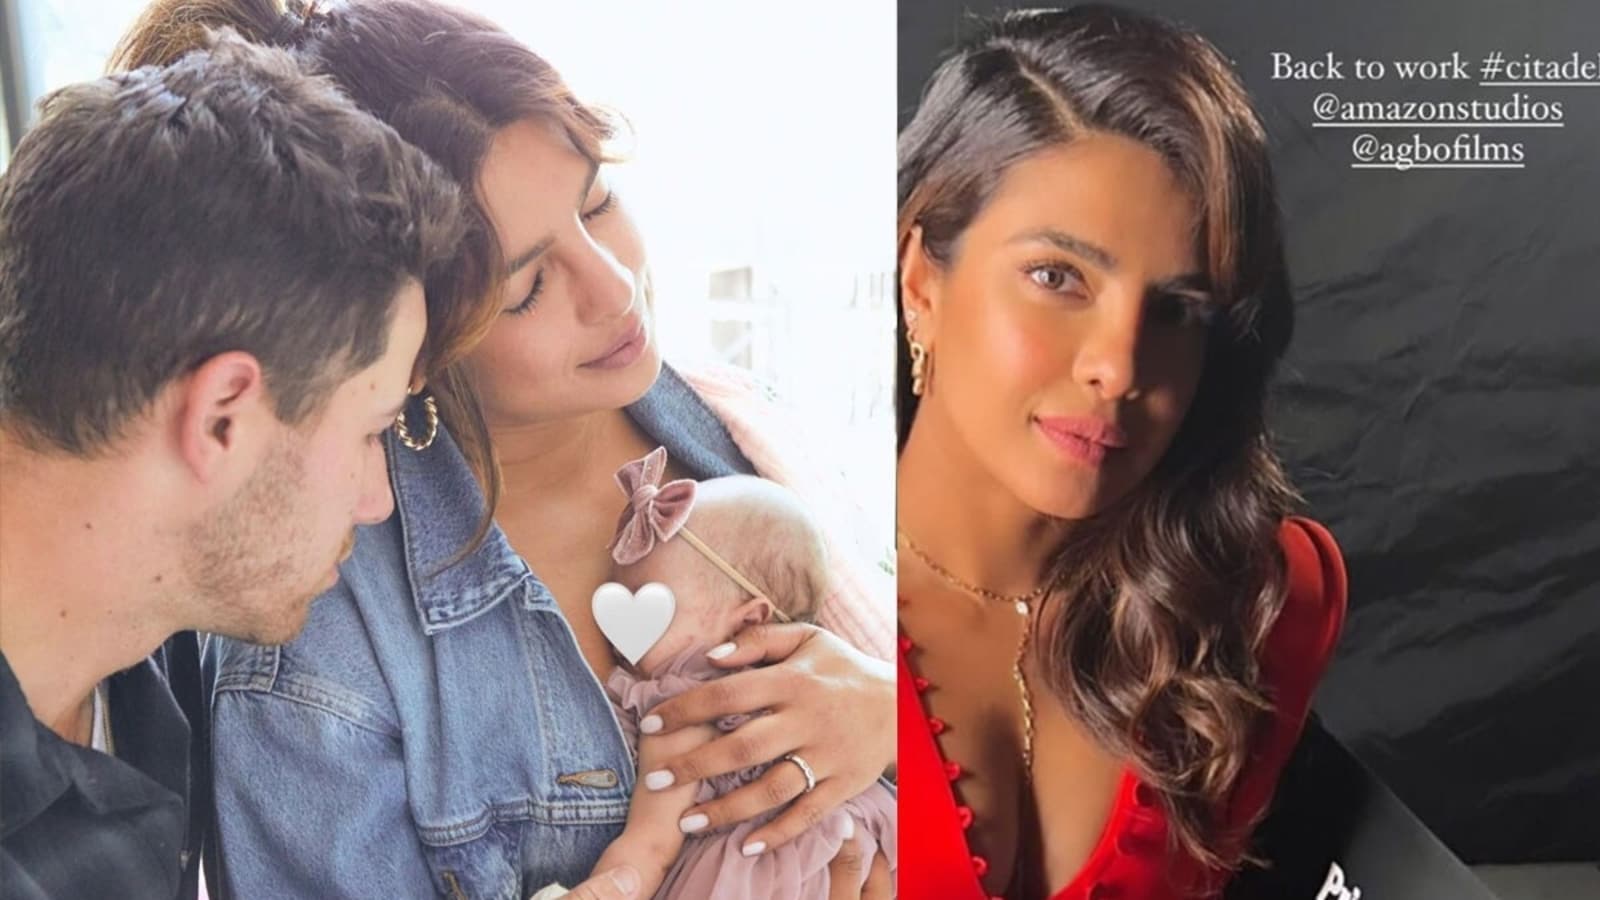 Priyanka Chopra gets back to work day after welcoming her baby girl home, shares glamourous pic from Citadel sets